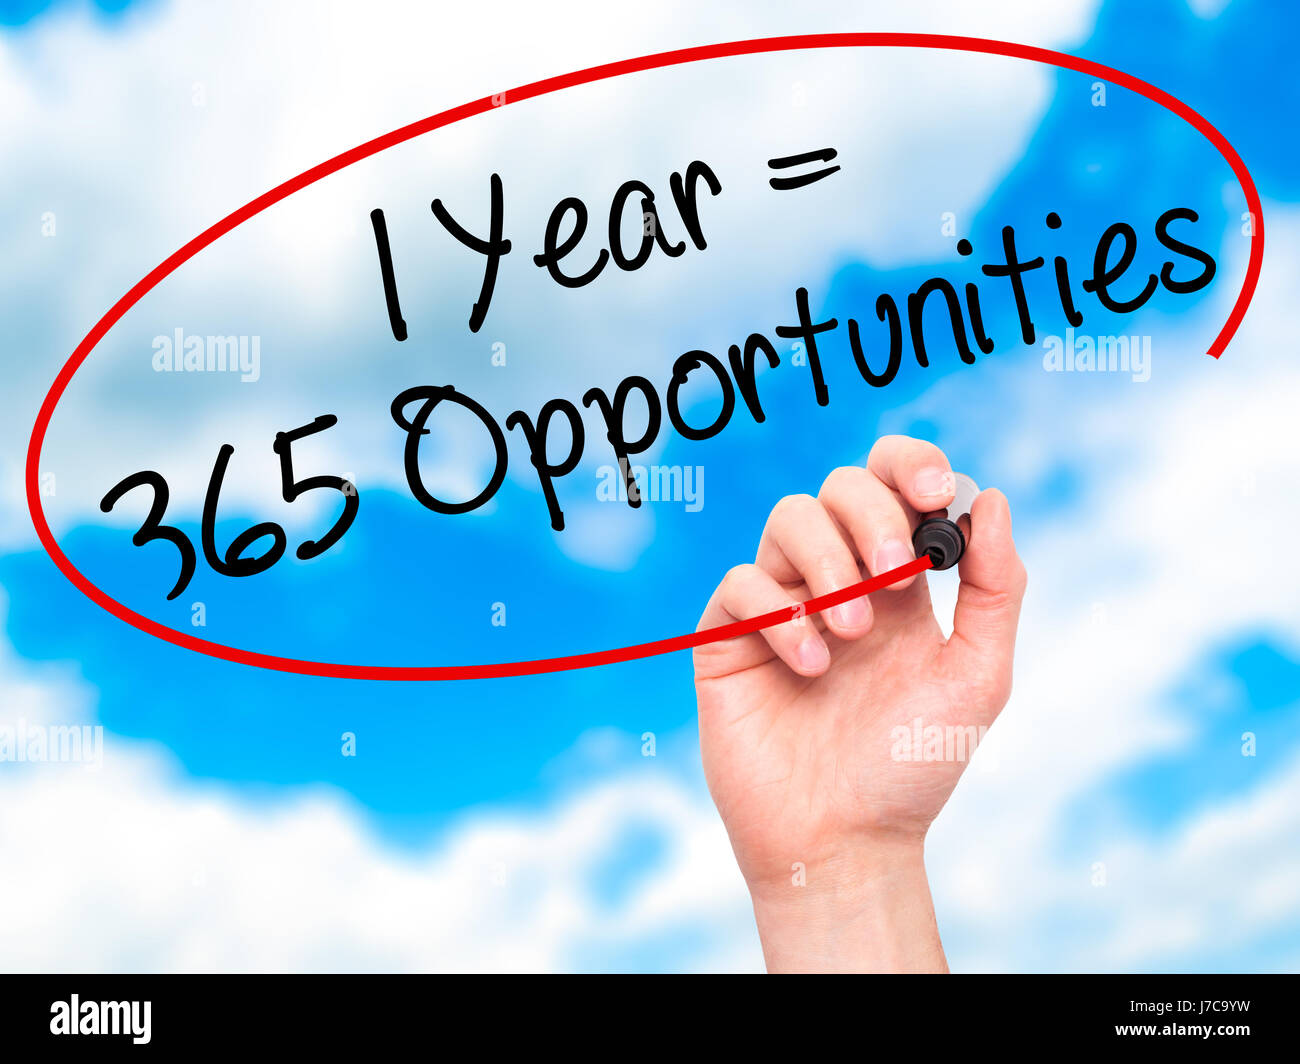 Man Hand Writing 1 Year 365 Opportunities With Black Marker On Stock Photo Alamy